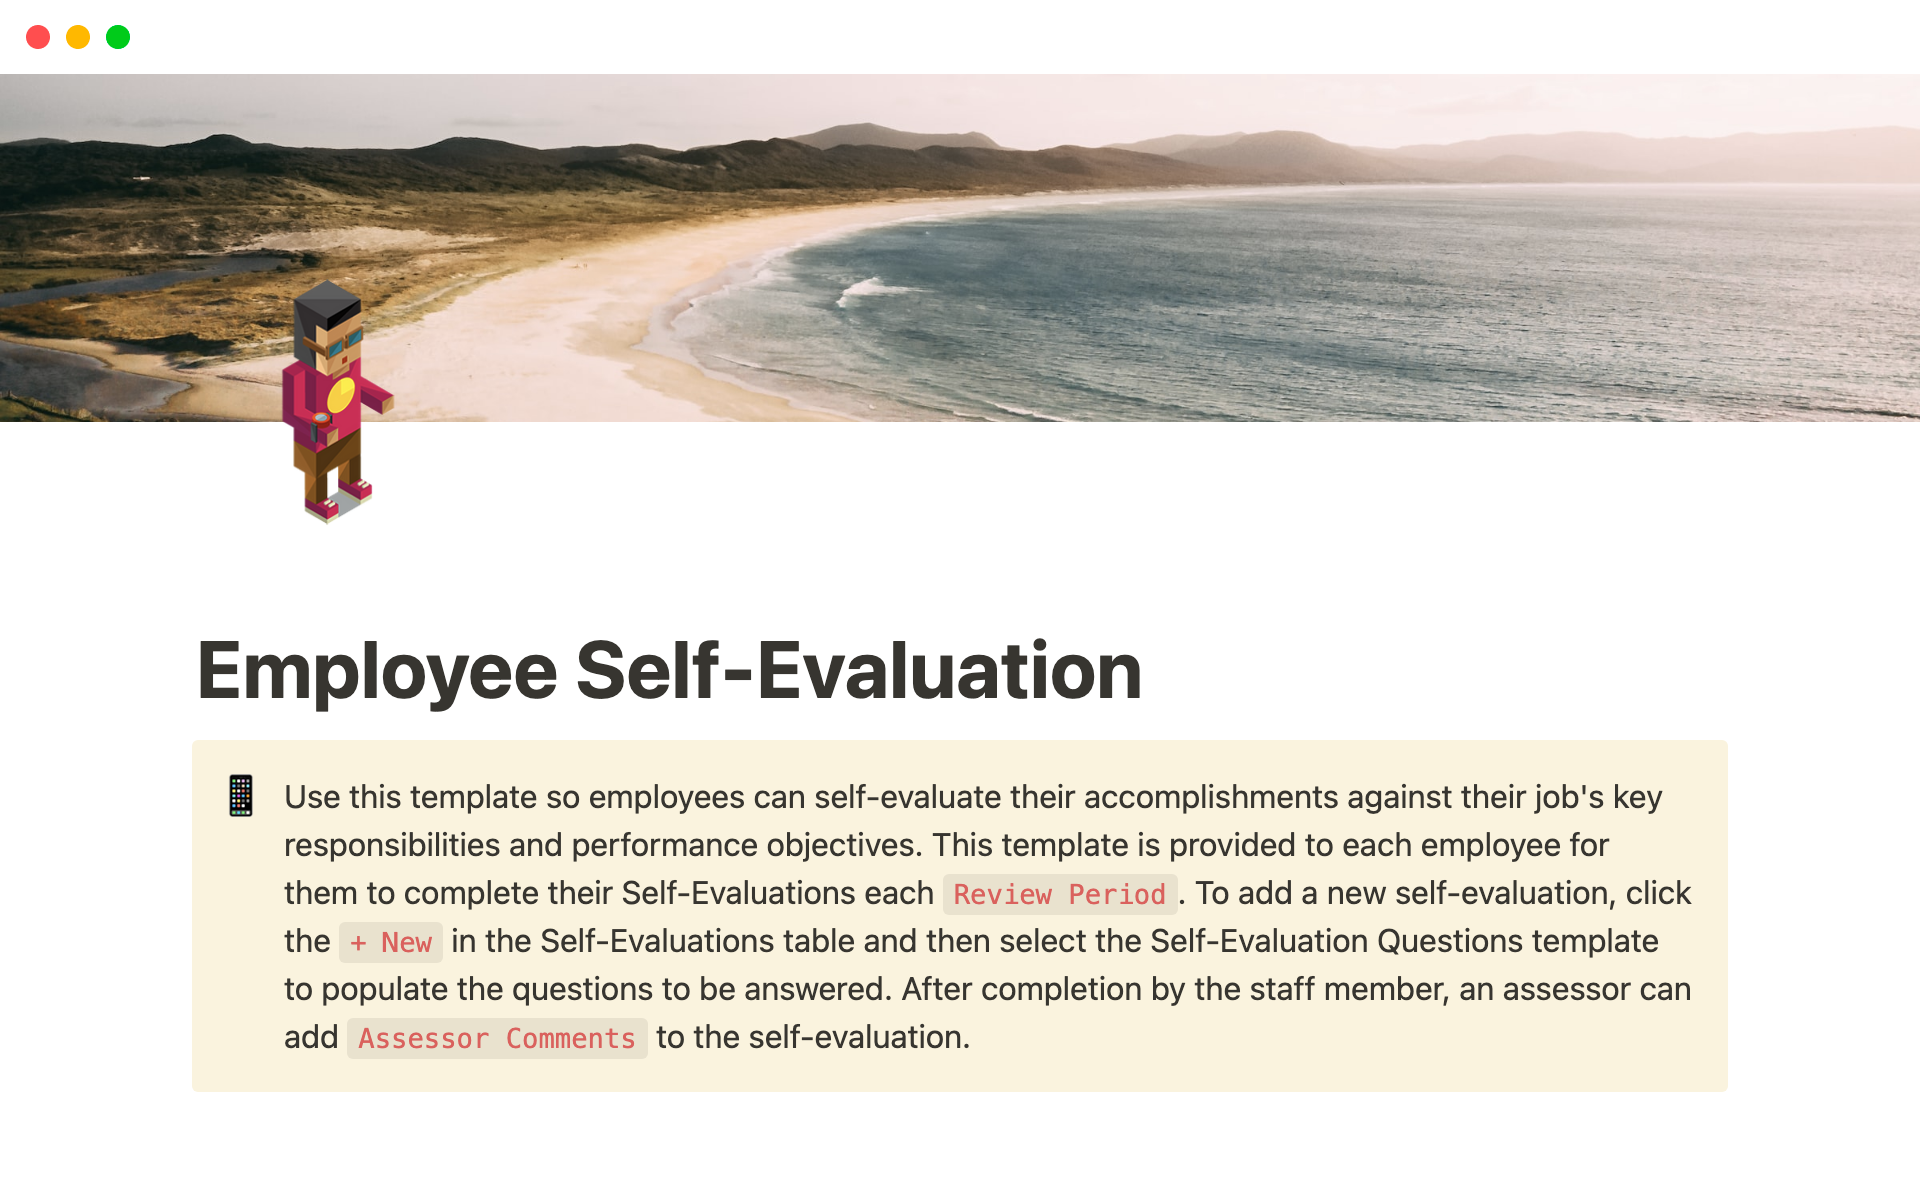 This employee self-evaluation template provides an effective tool to compare your accomplishments against your job’s key responsibilities and performance objectives.